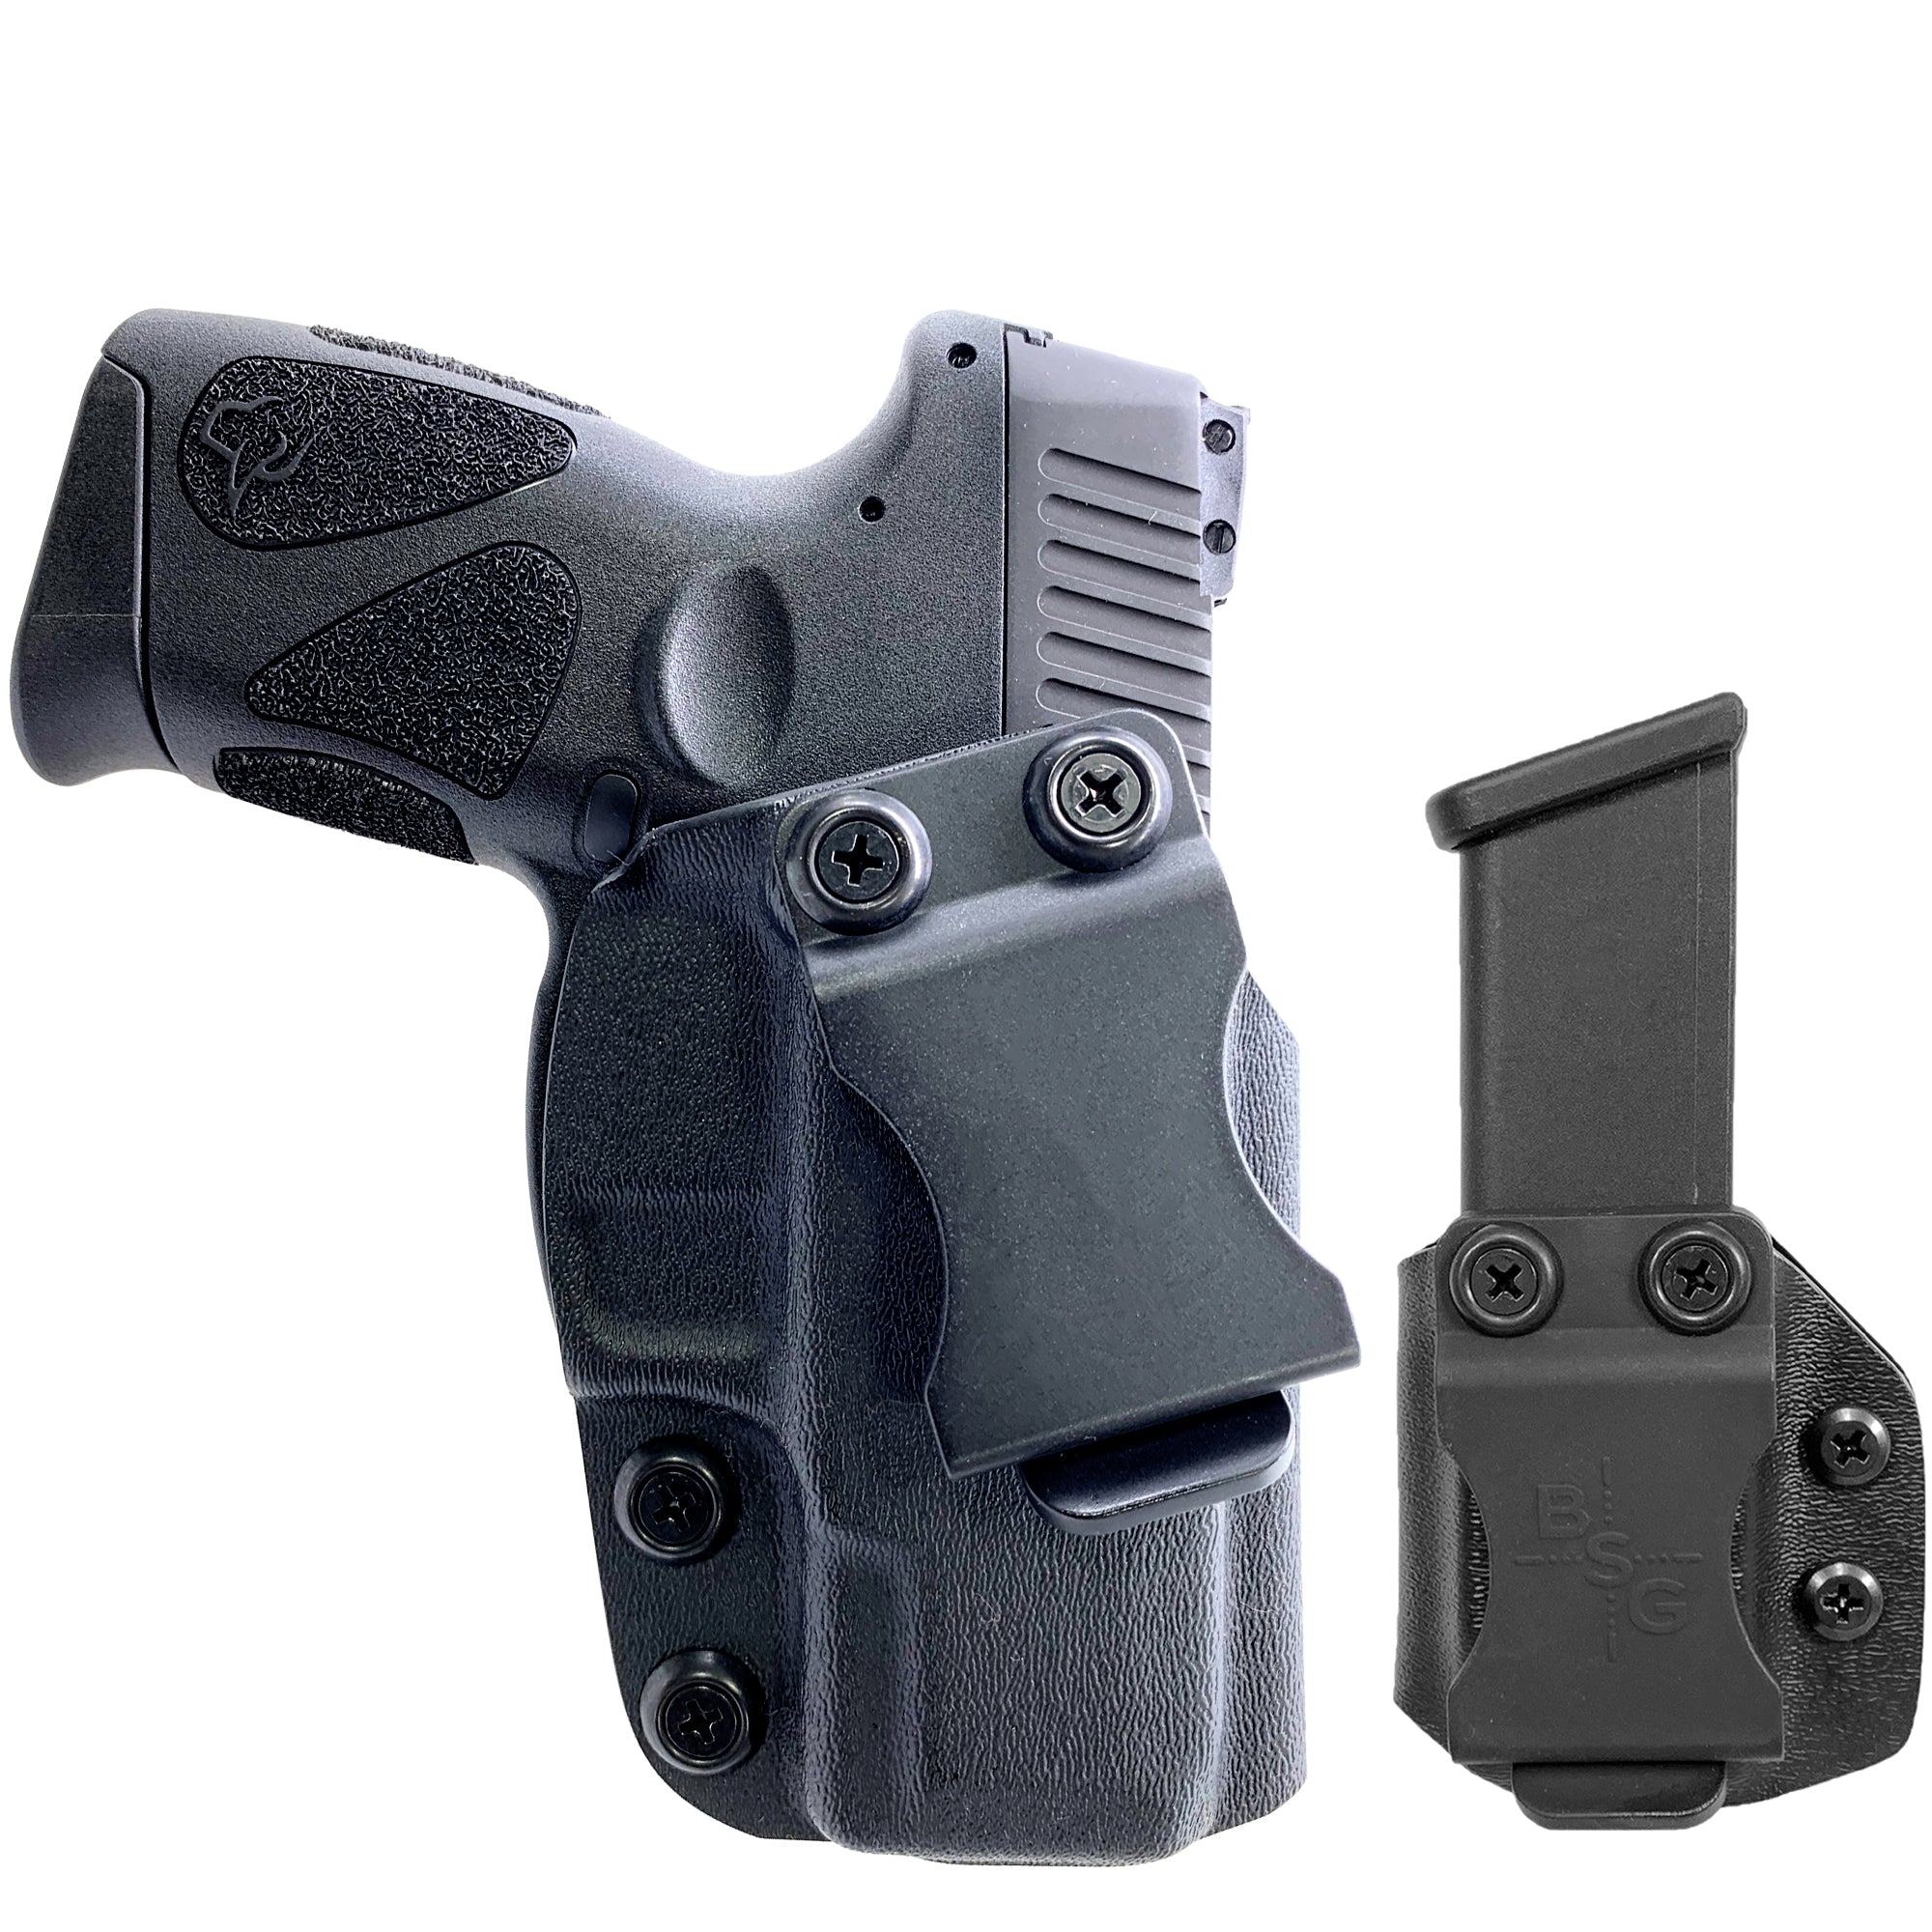 Taurus G2C IWB Kydex Holster & Mag Pouch Combo